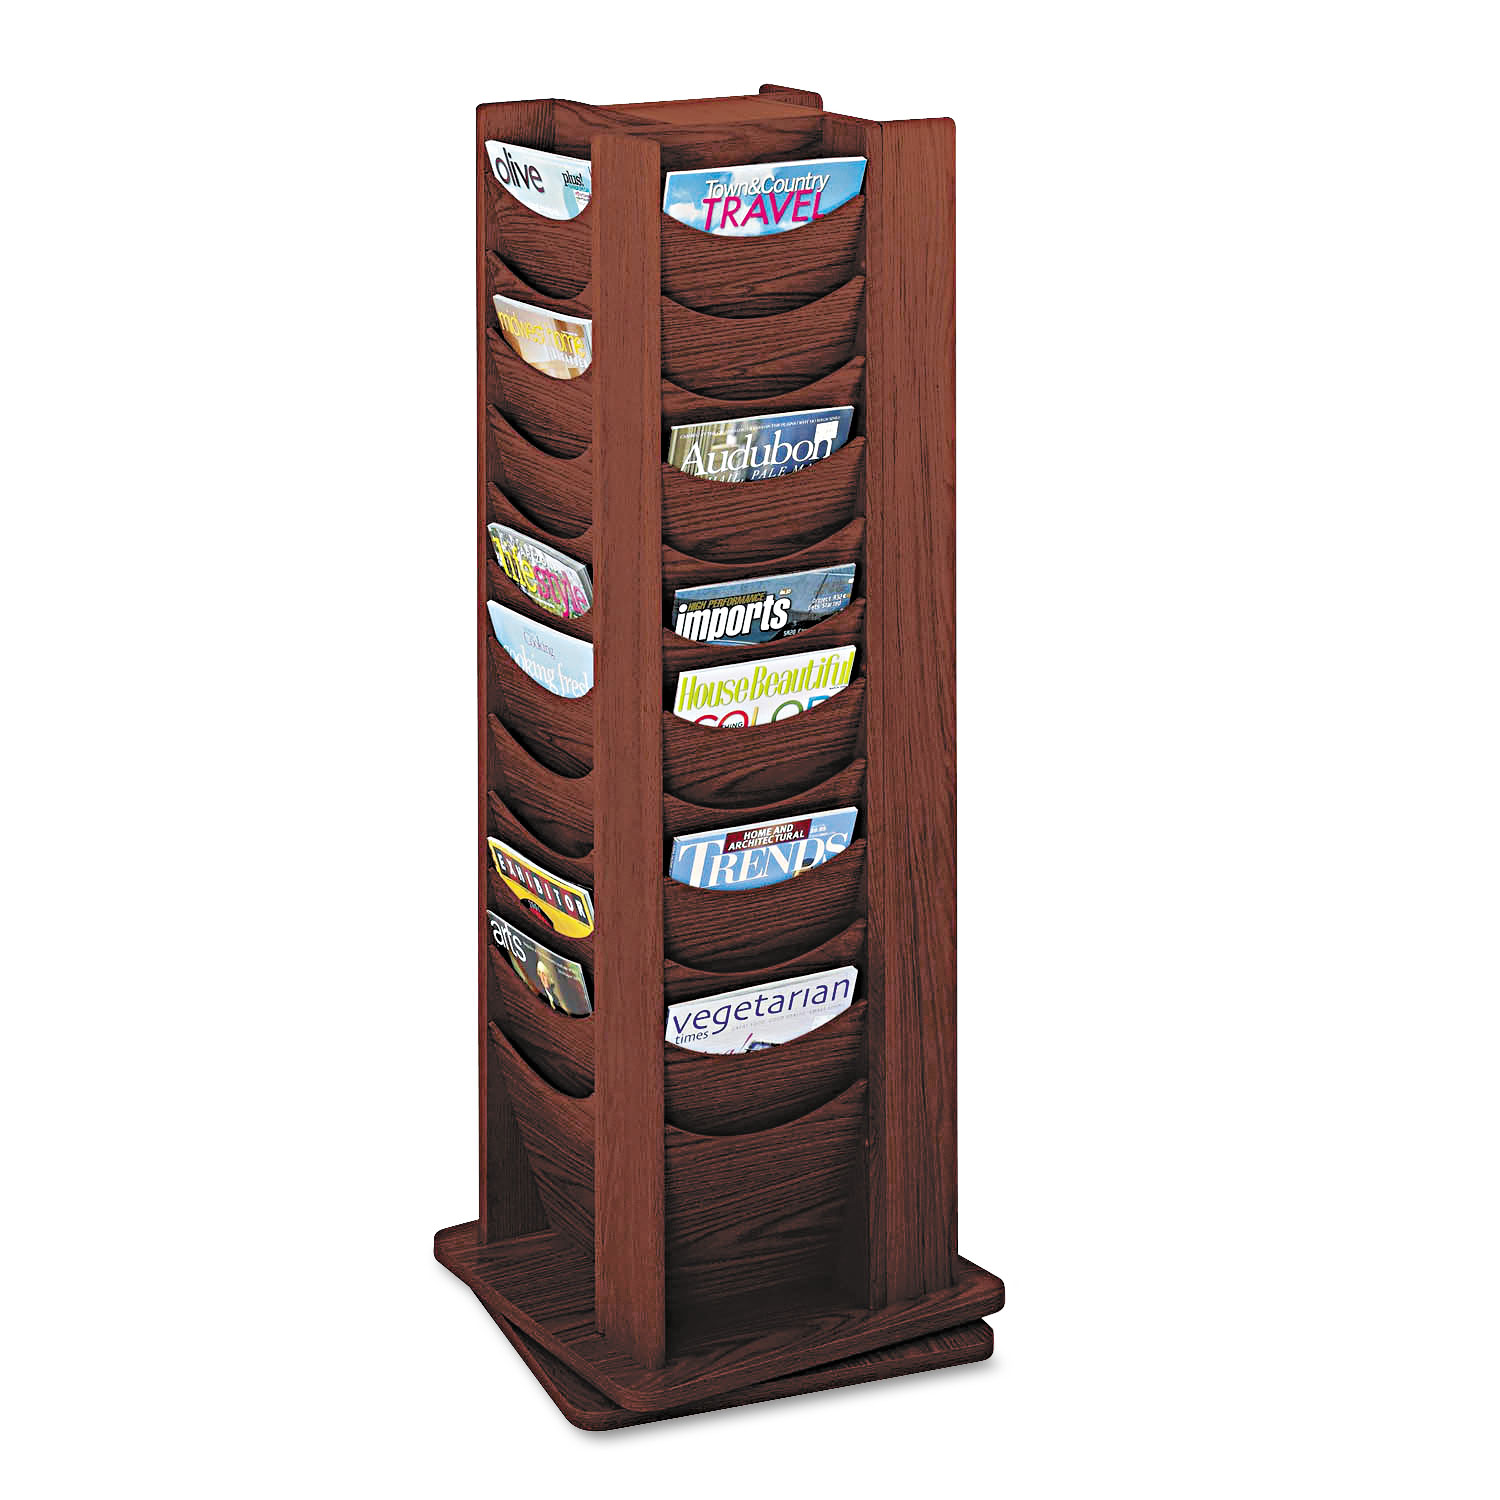 Safco SAF4335MH Rotary Display, 48 Compartments, 17-3/4w x 17-3/4d x 49-1/2h, Mahogany